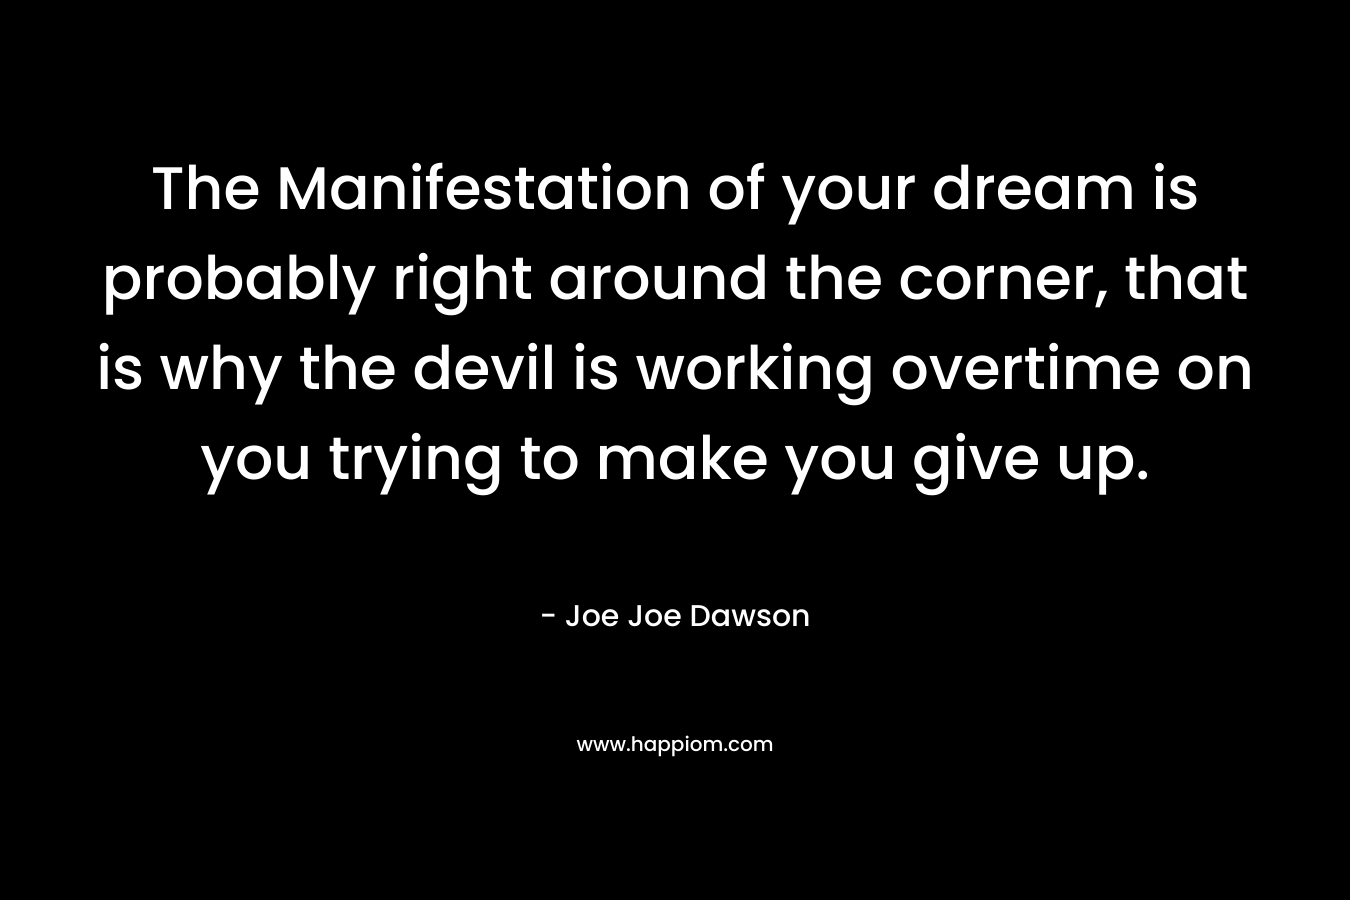 The Manifestation of your dream is probably right around the corner, that is why the devil is working overtime on you trying to make you give up.